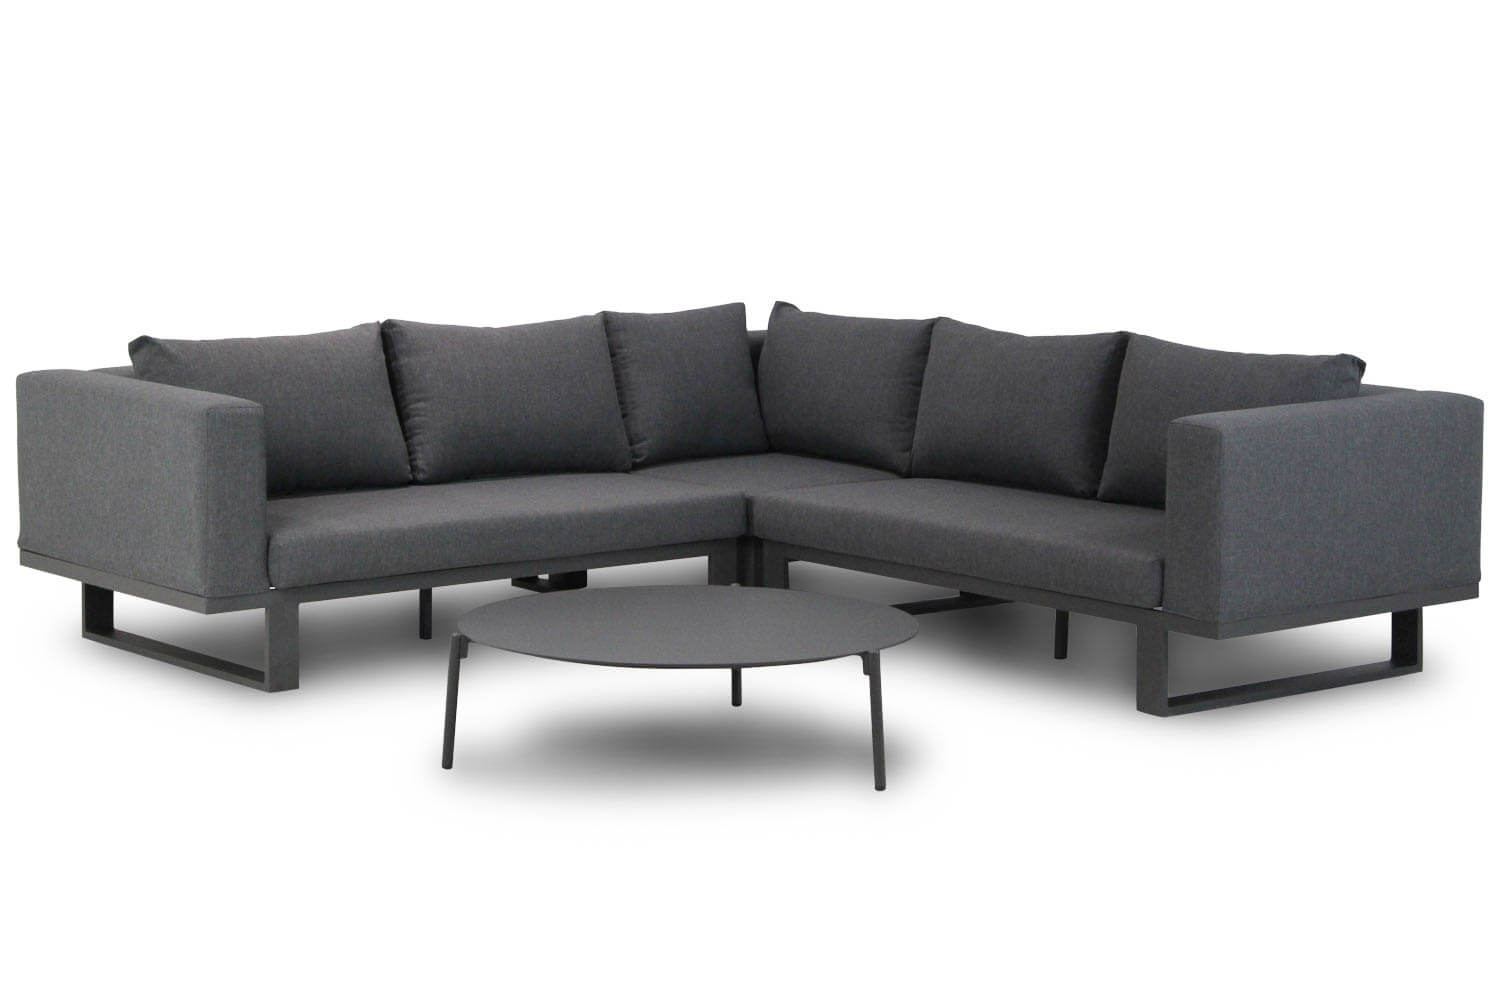 coco club loungeset stof pacific 100 cm - Lifestyle Club/Pacific 100 cm hoek loungeset 4-delig